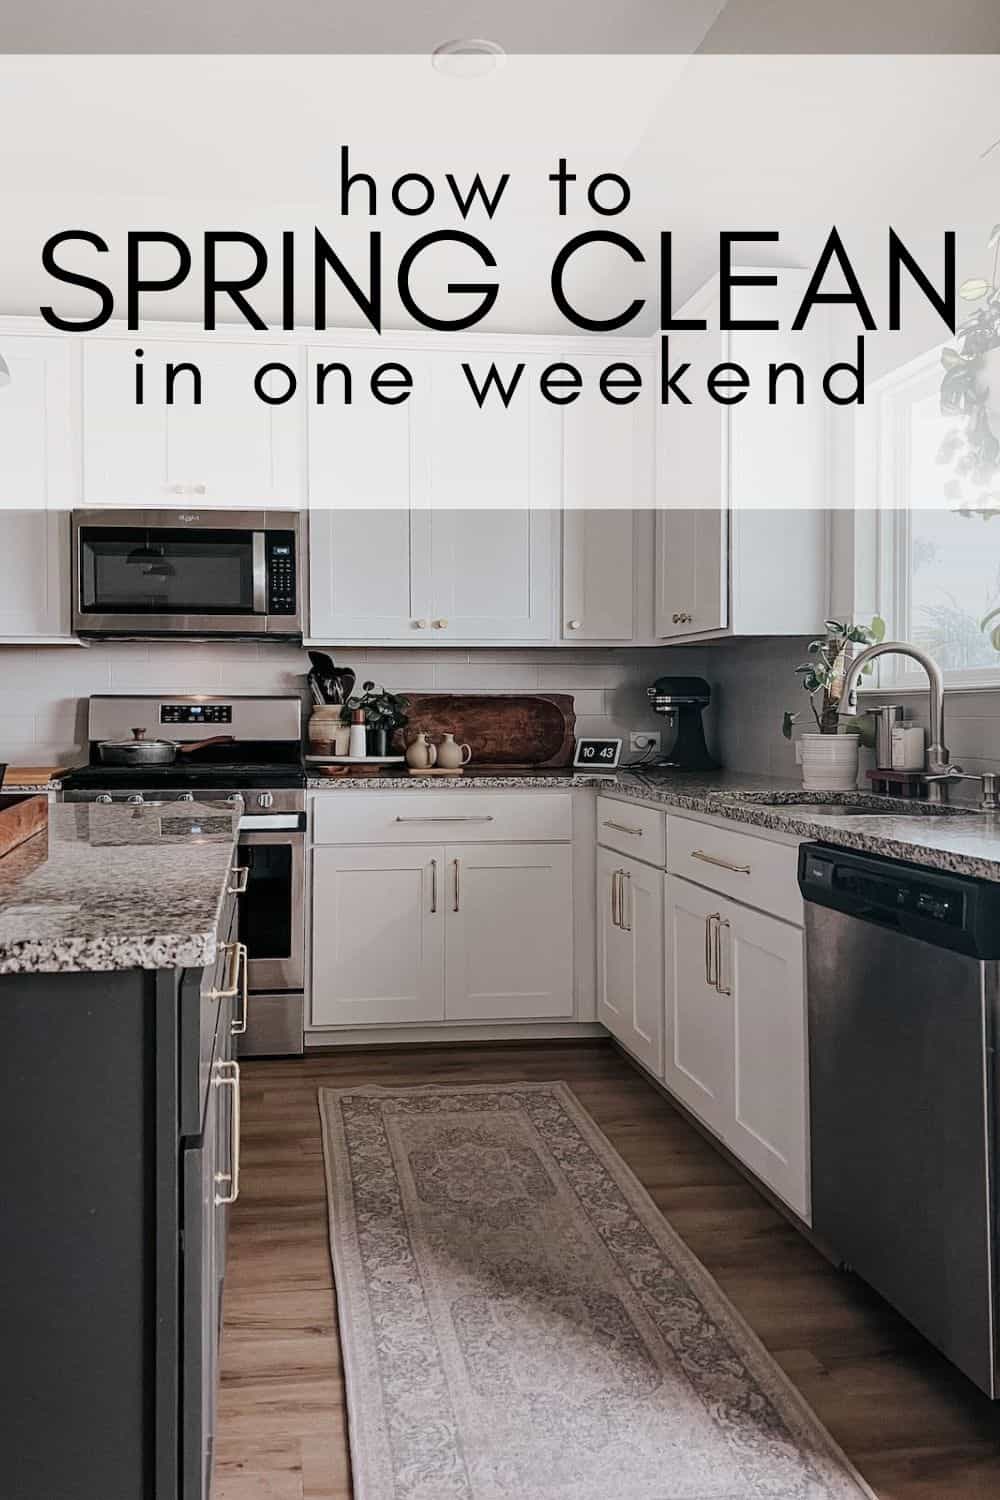 photo of a clean kitchen with text overlay - how to spring clean in one weekend 